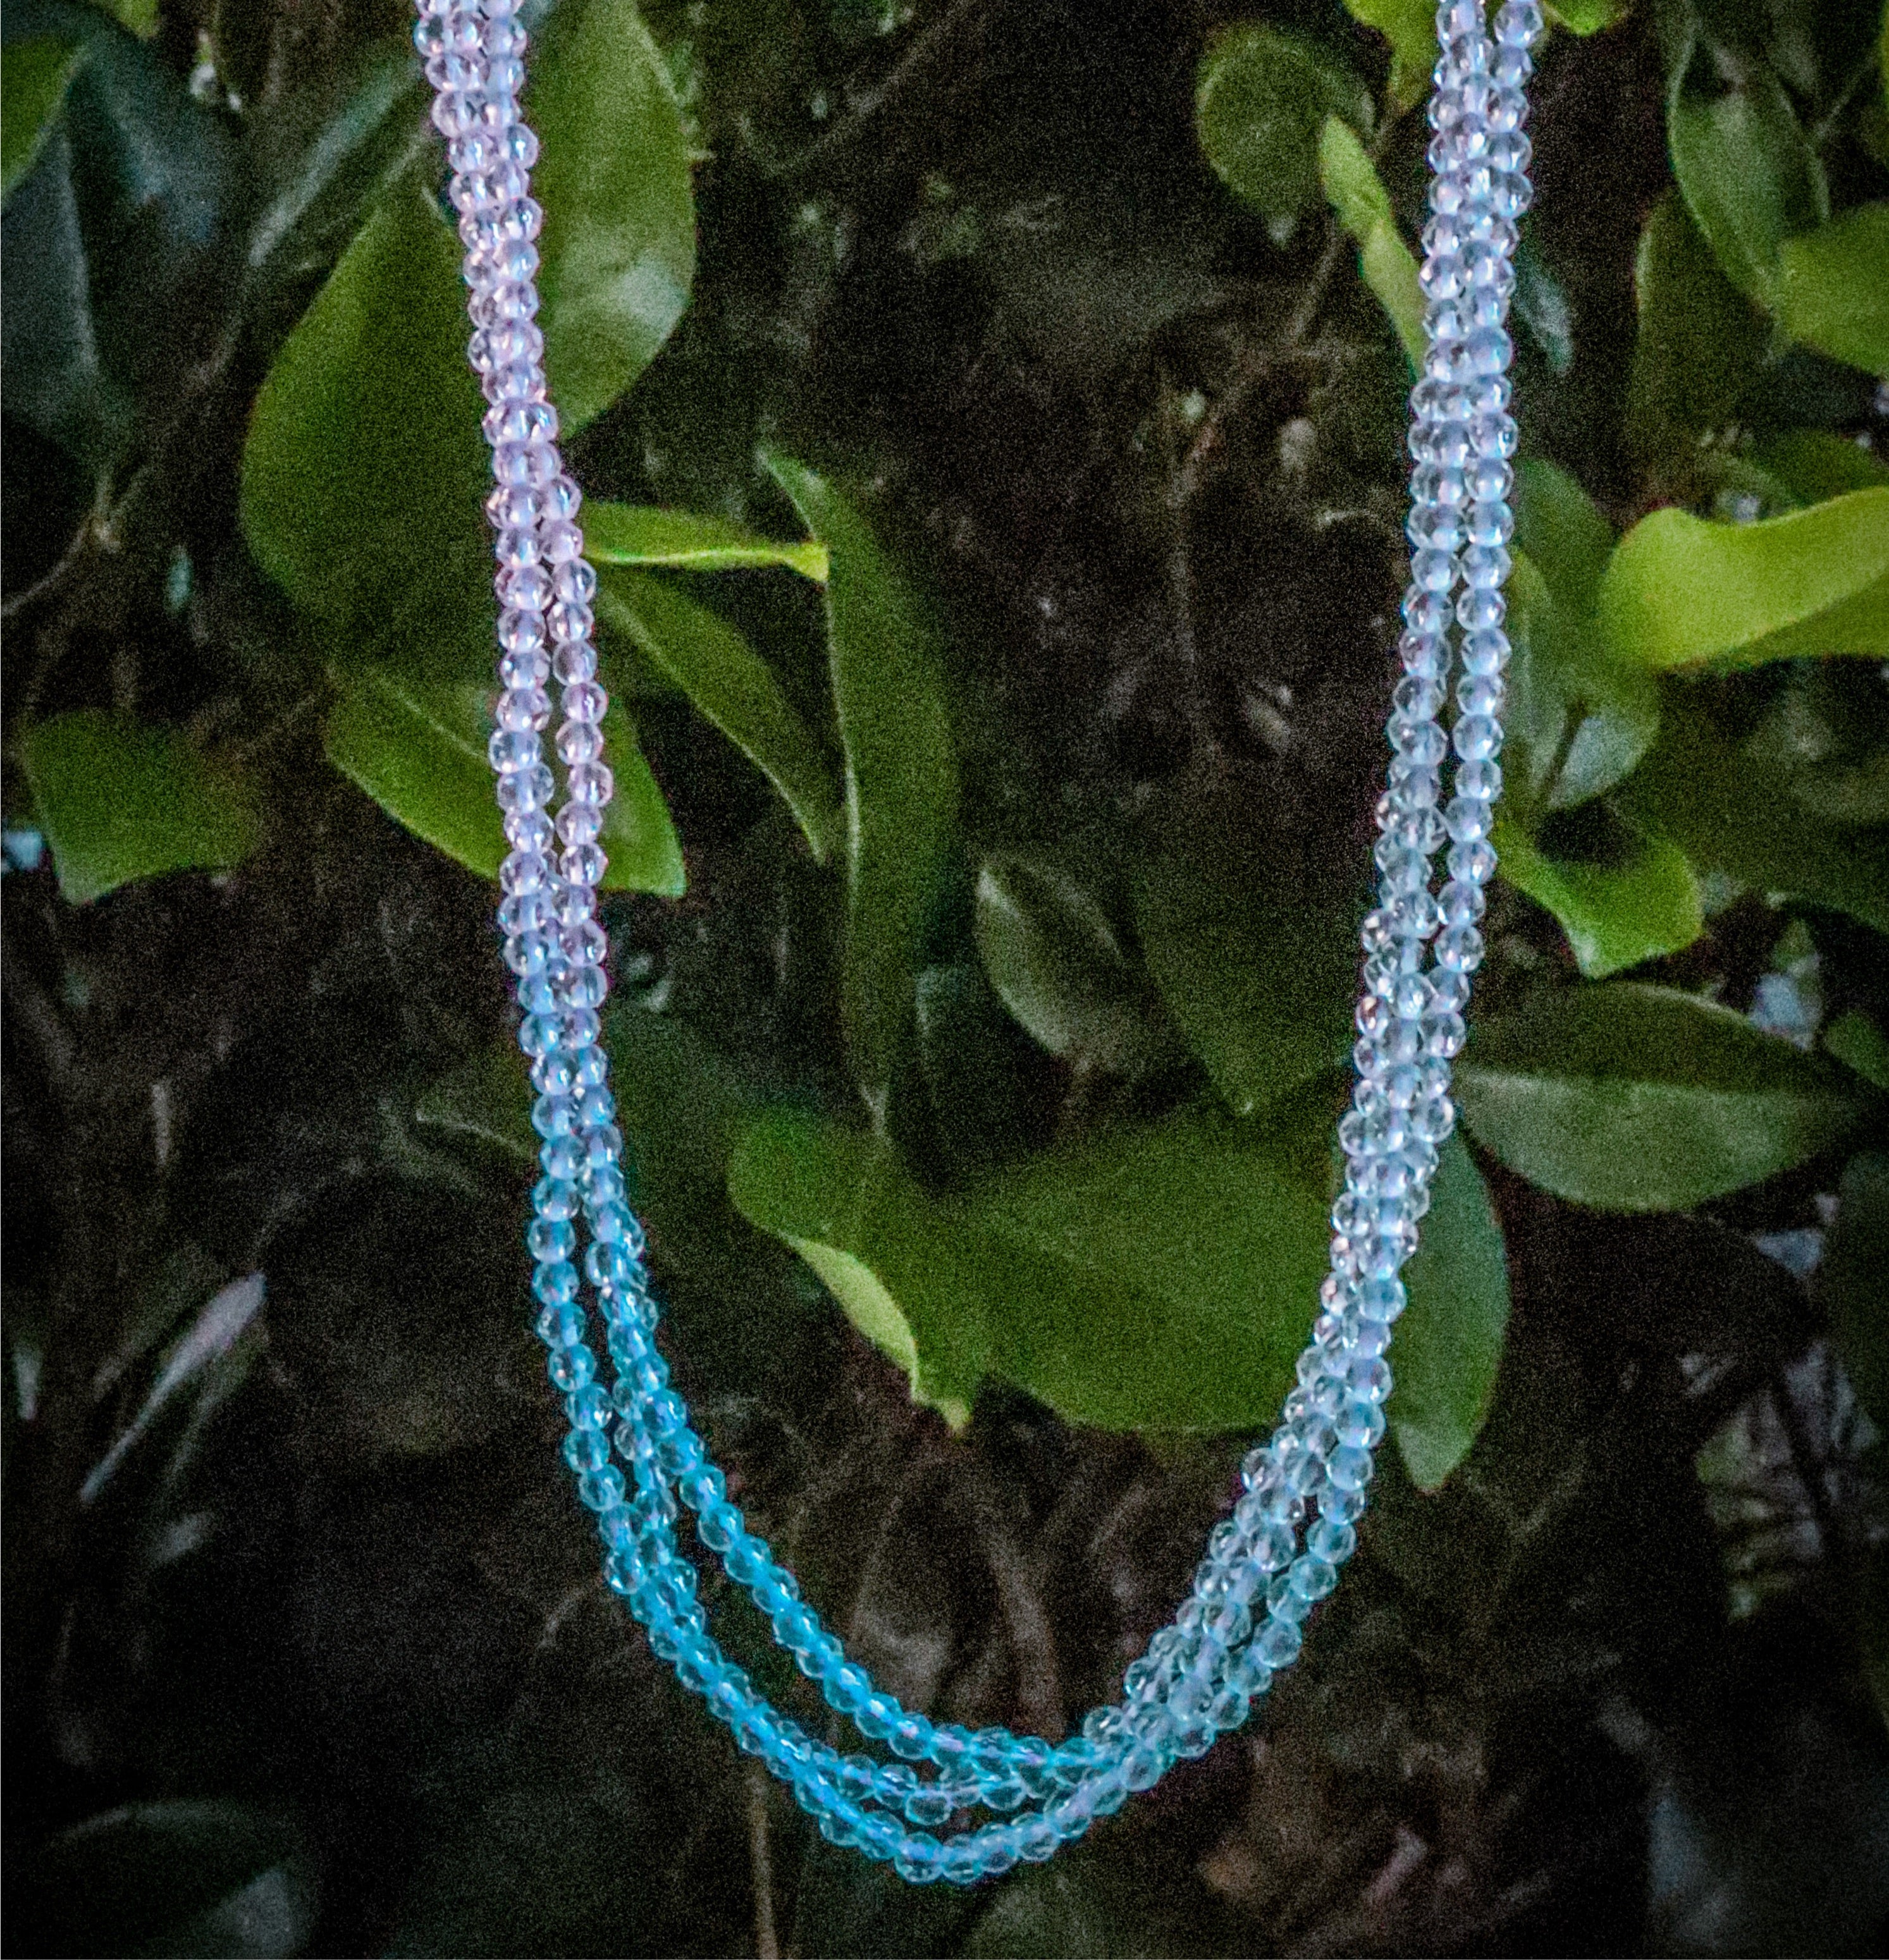 Tri Layer Cotton Candy Pink & Blue Ombre Crystal Necklace